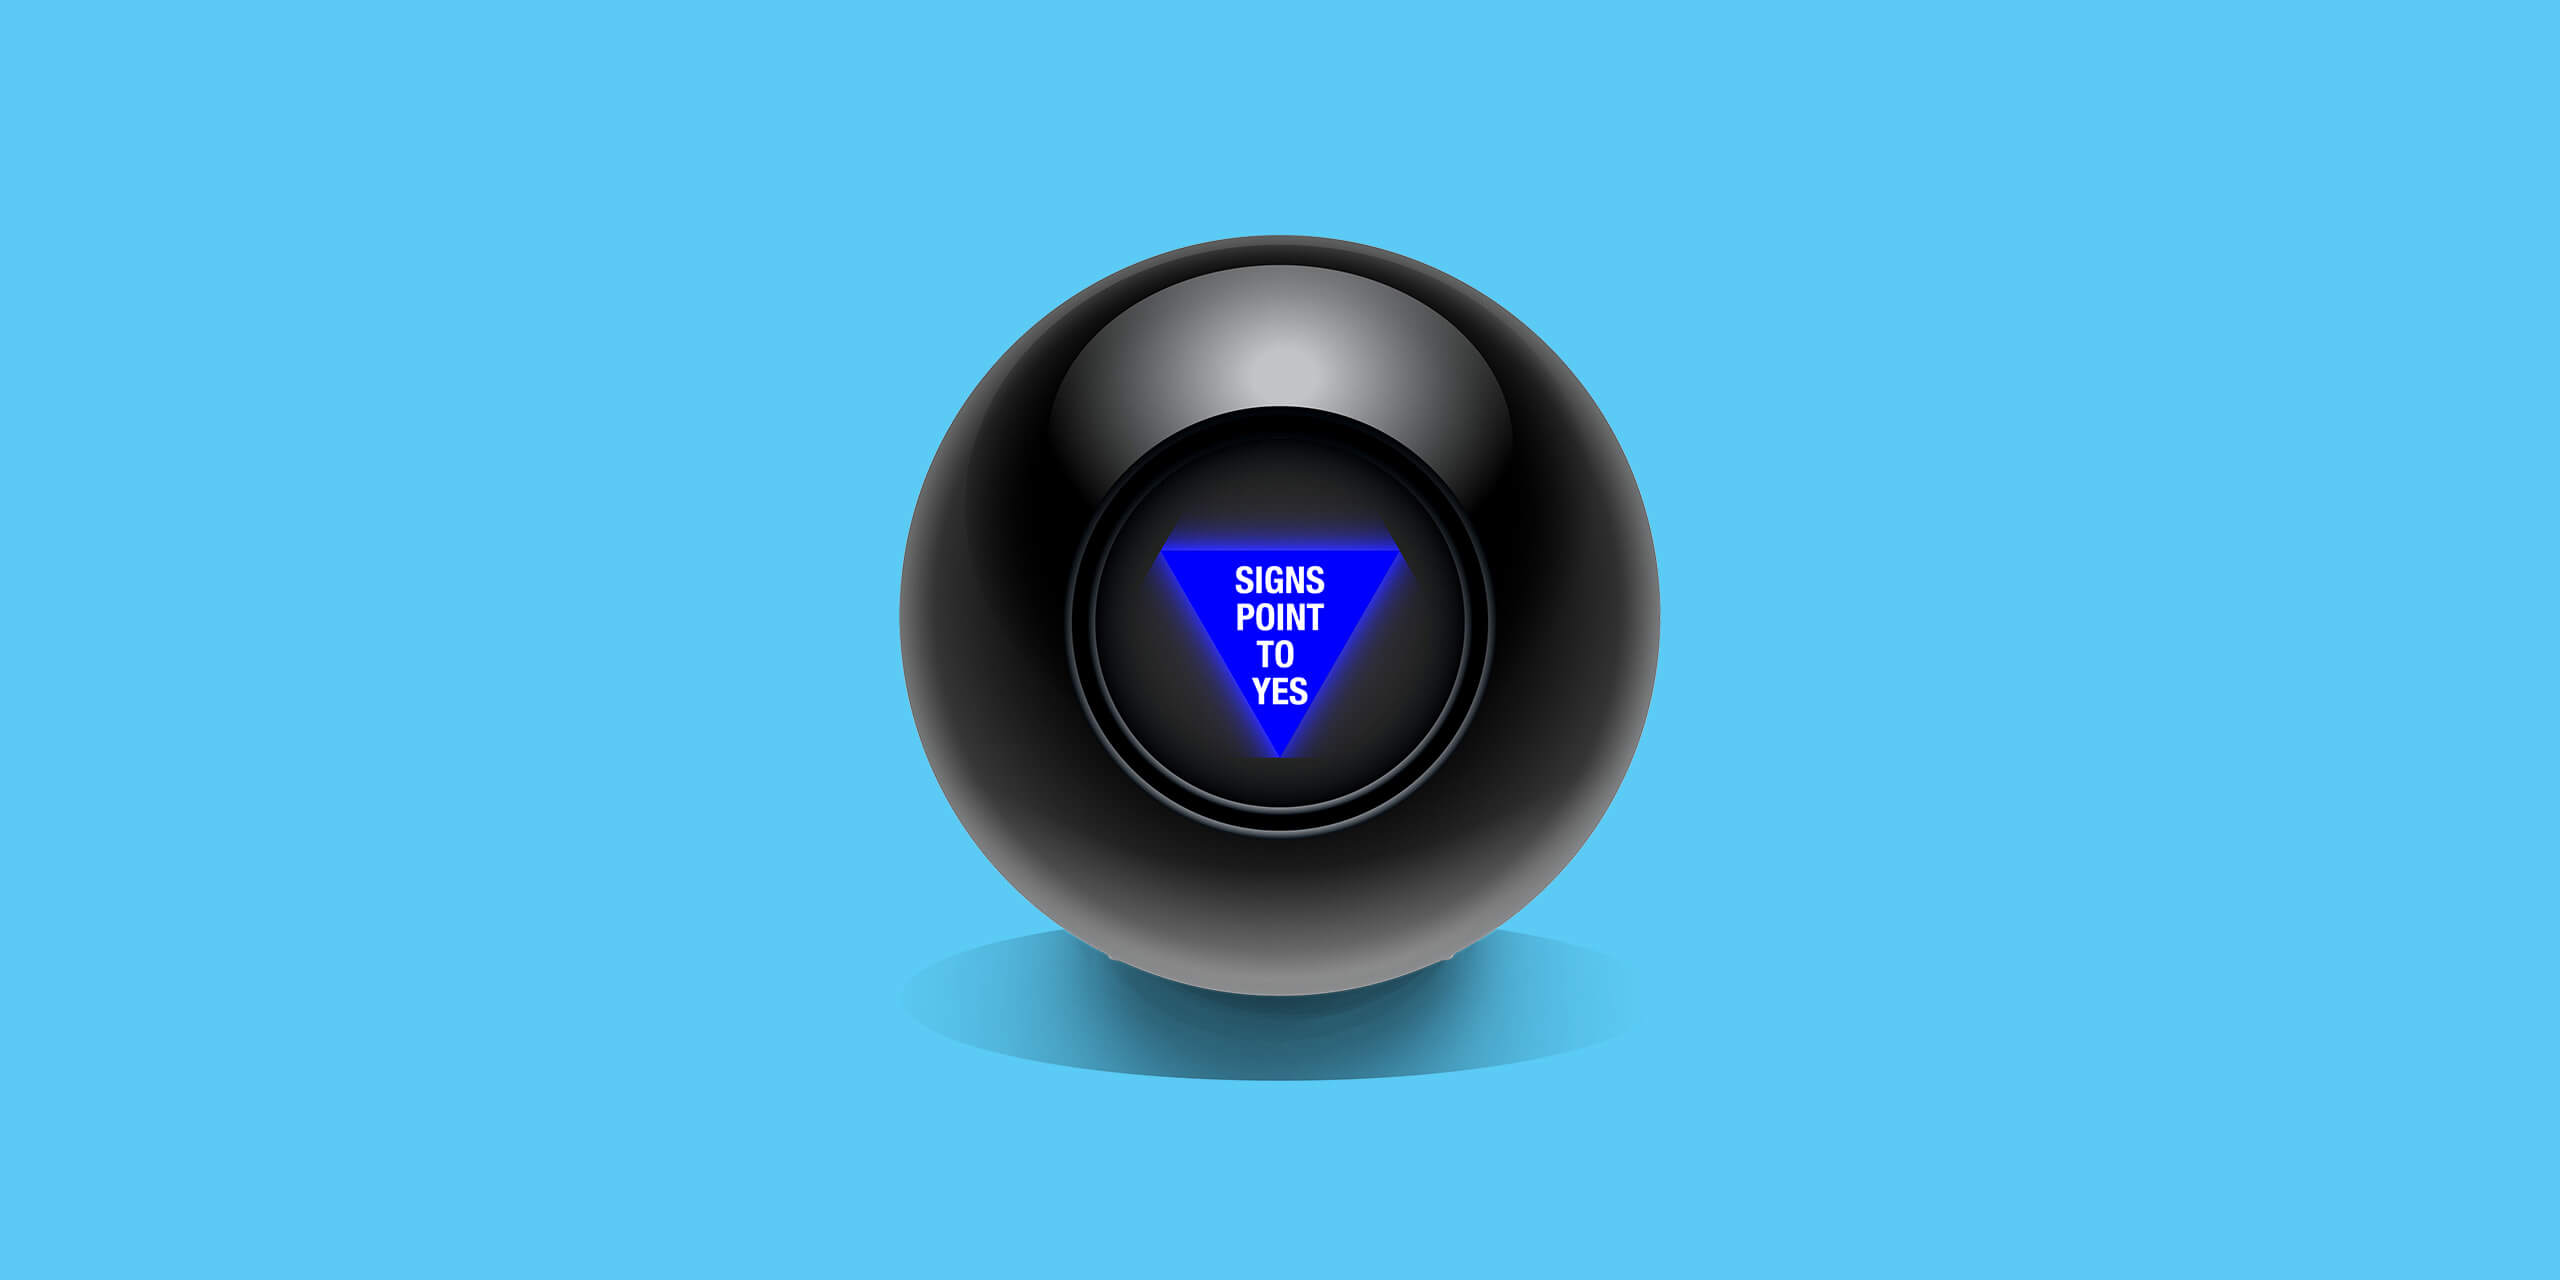 Magic 8 ball reading Signs Point to Yes